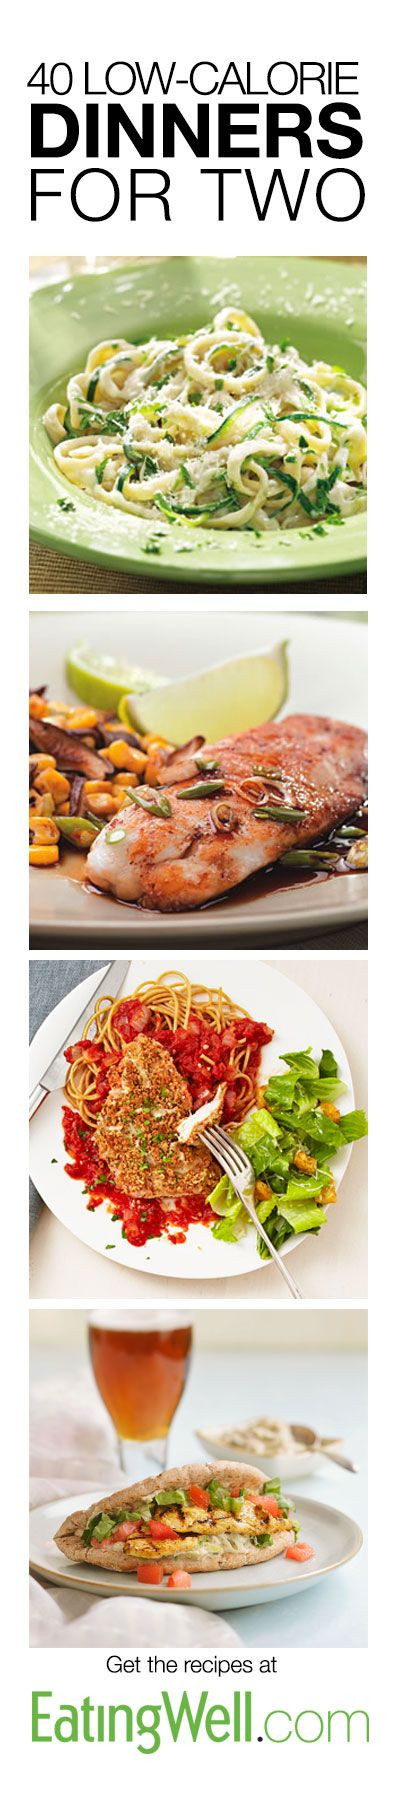 Low Calorie Dinners For Two
 21 the Best Ideas for Low Calorie Dinners for Two